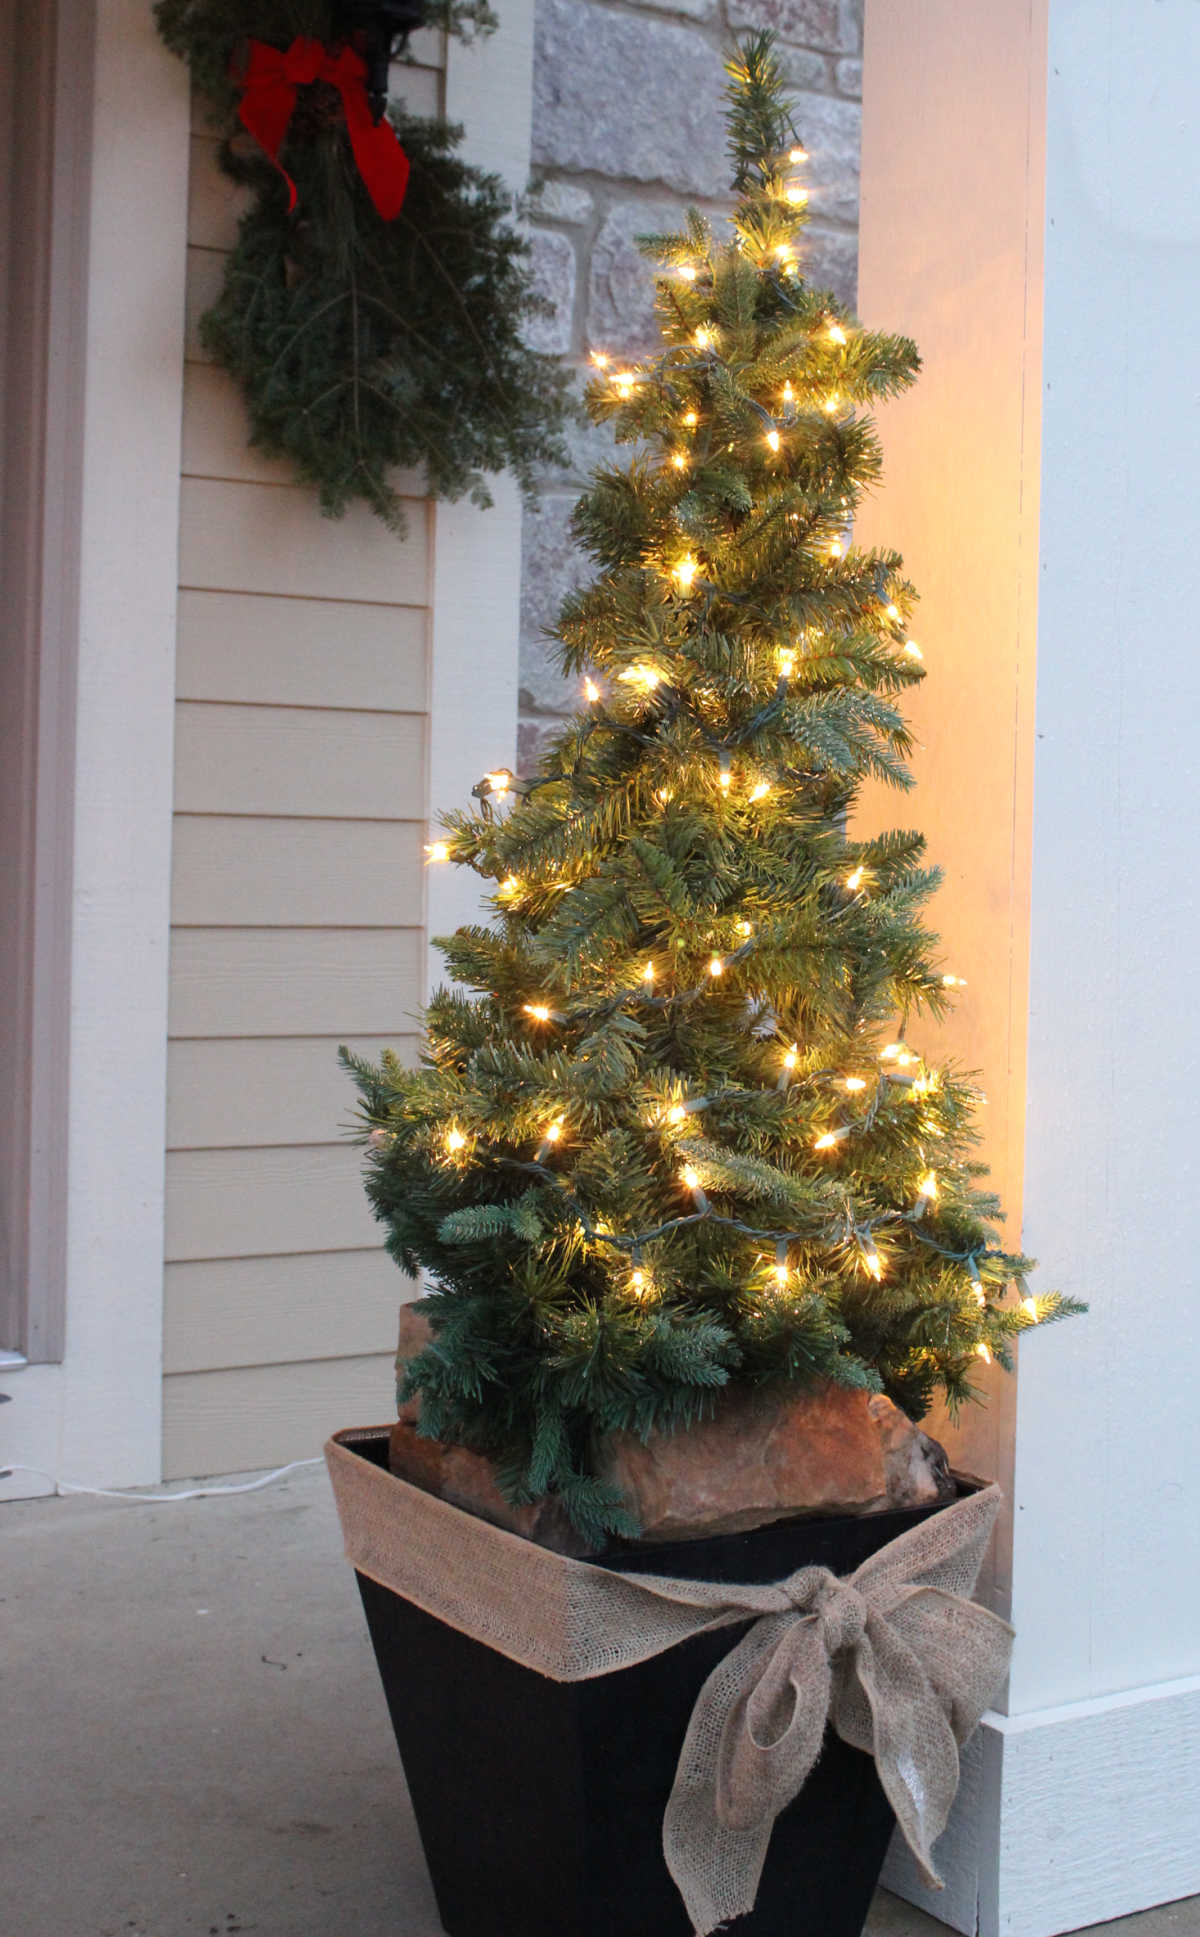 This small tree with white lights was put into a planter with a burlap fabric bow.